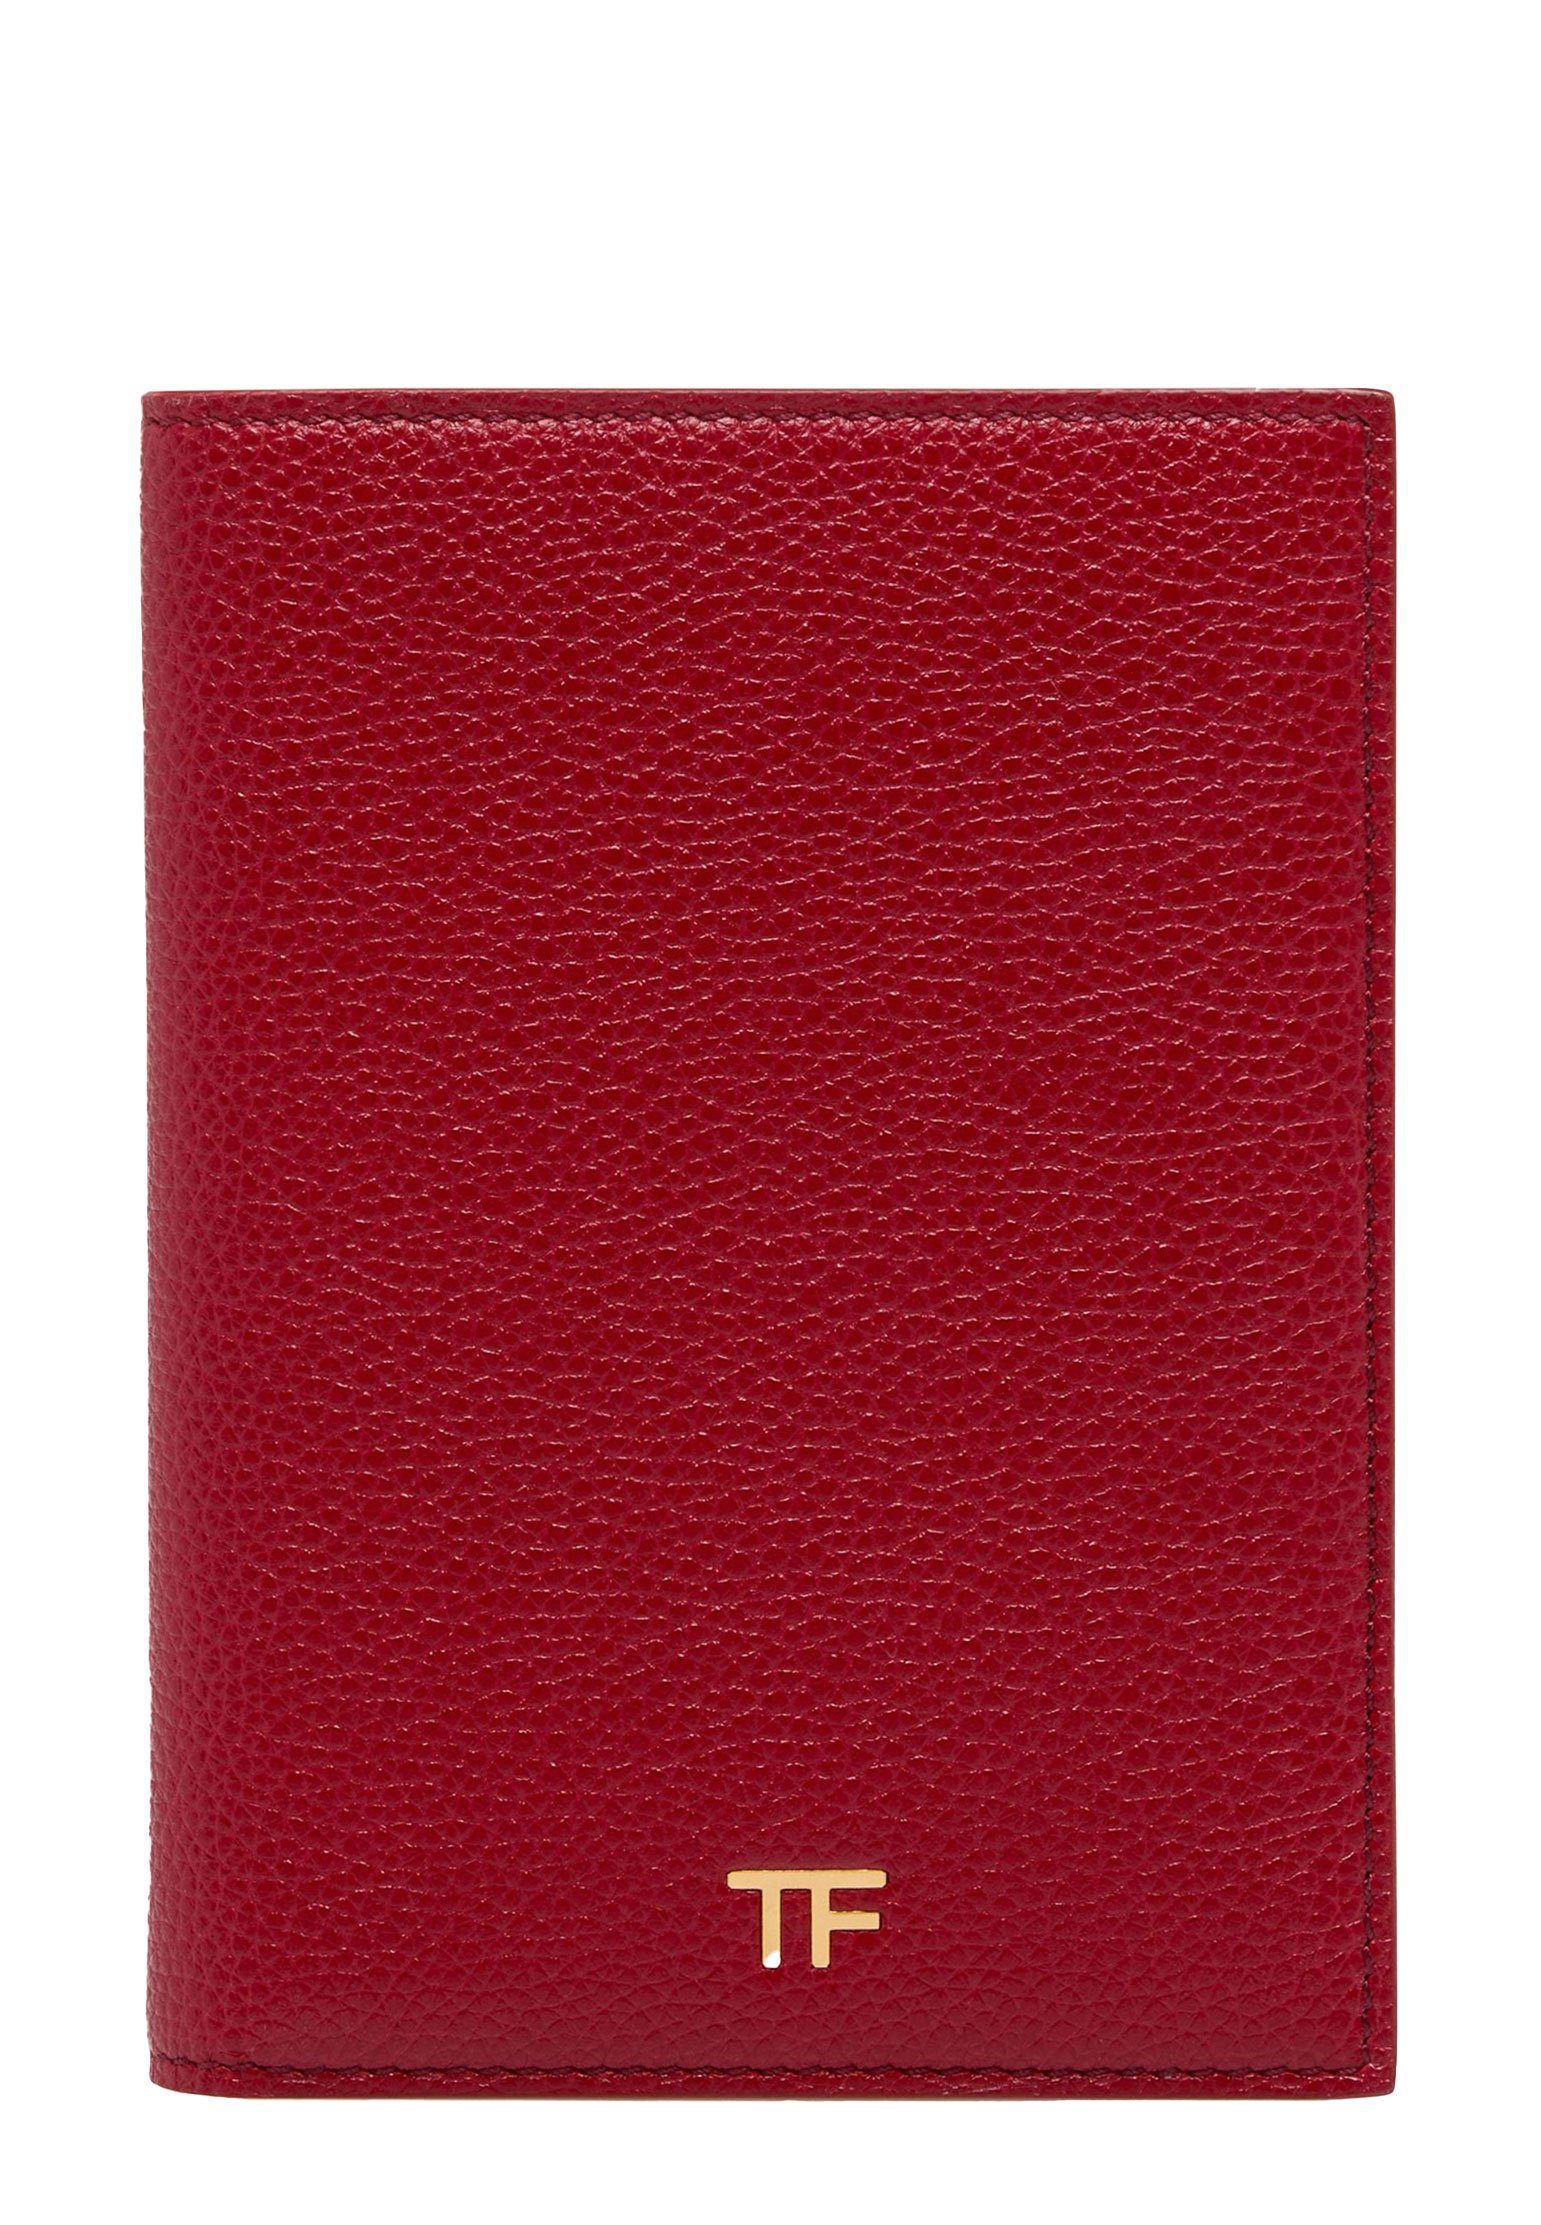 Passport TOM FORD Color: red (Code: 1094) in online store Allure